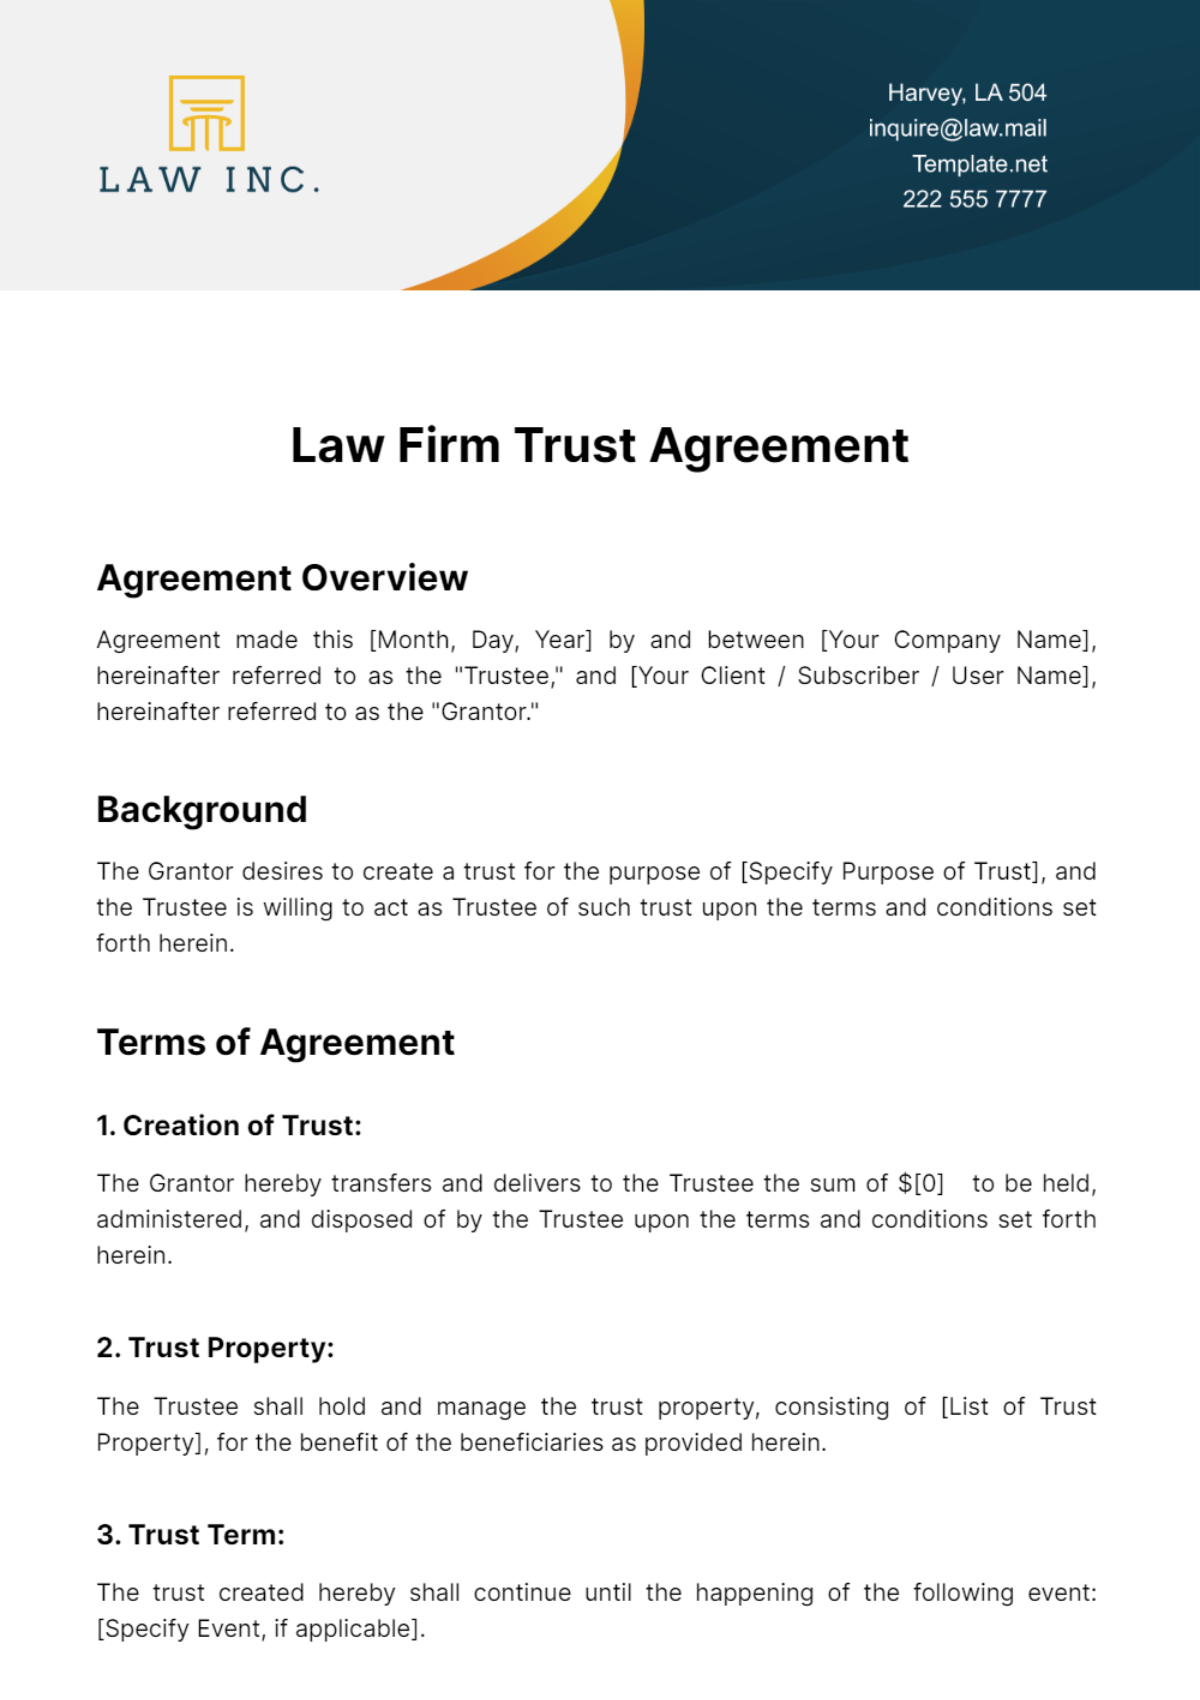 Law Firm Trust Agreement Template